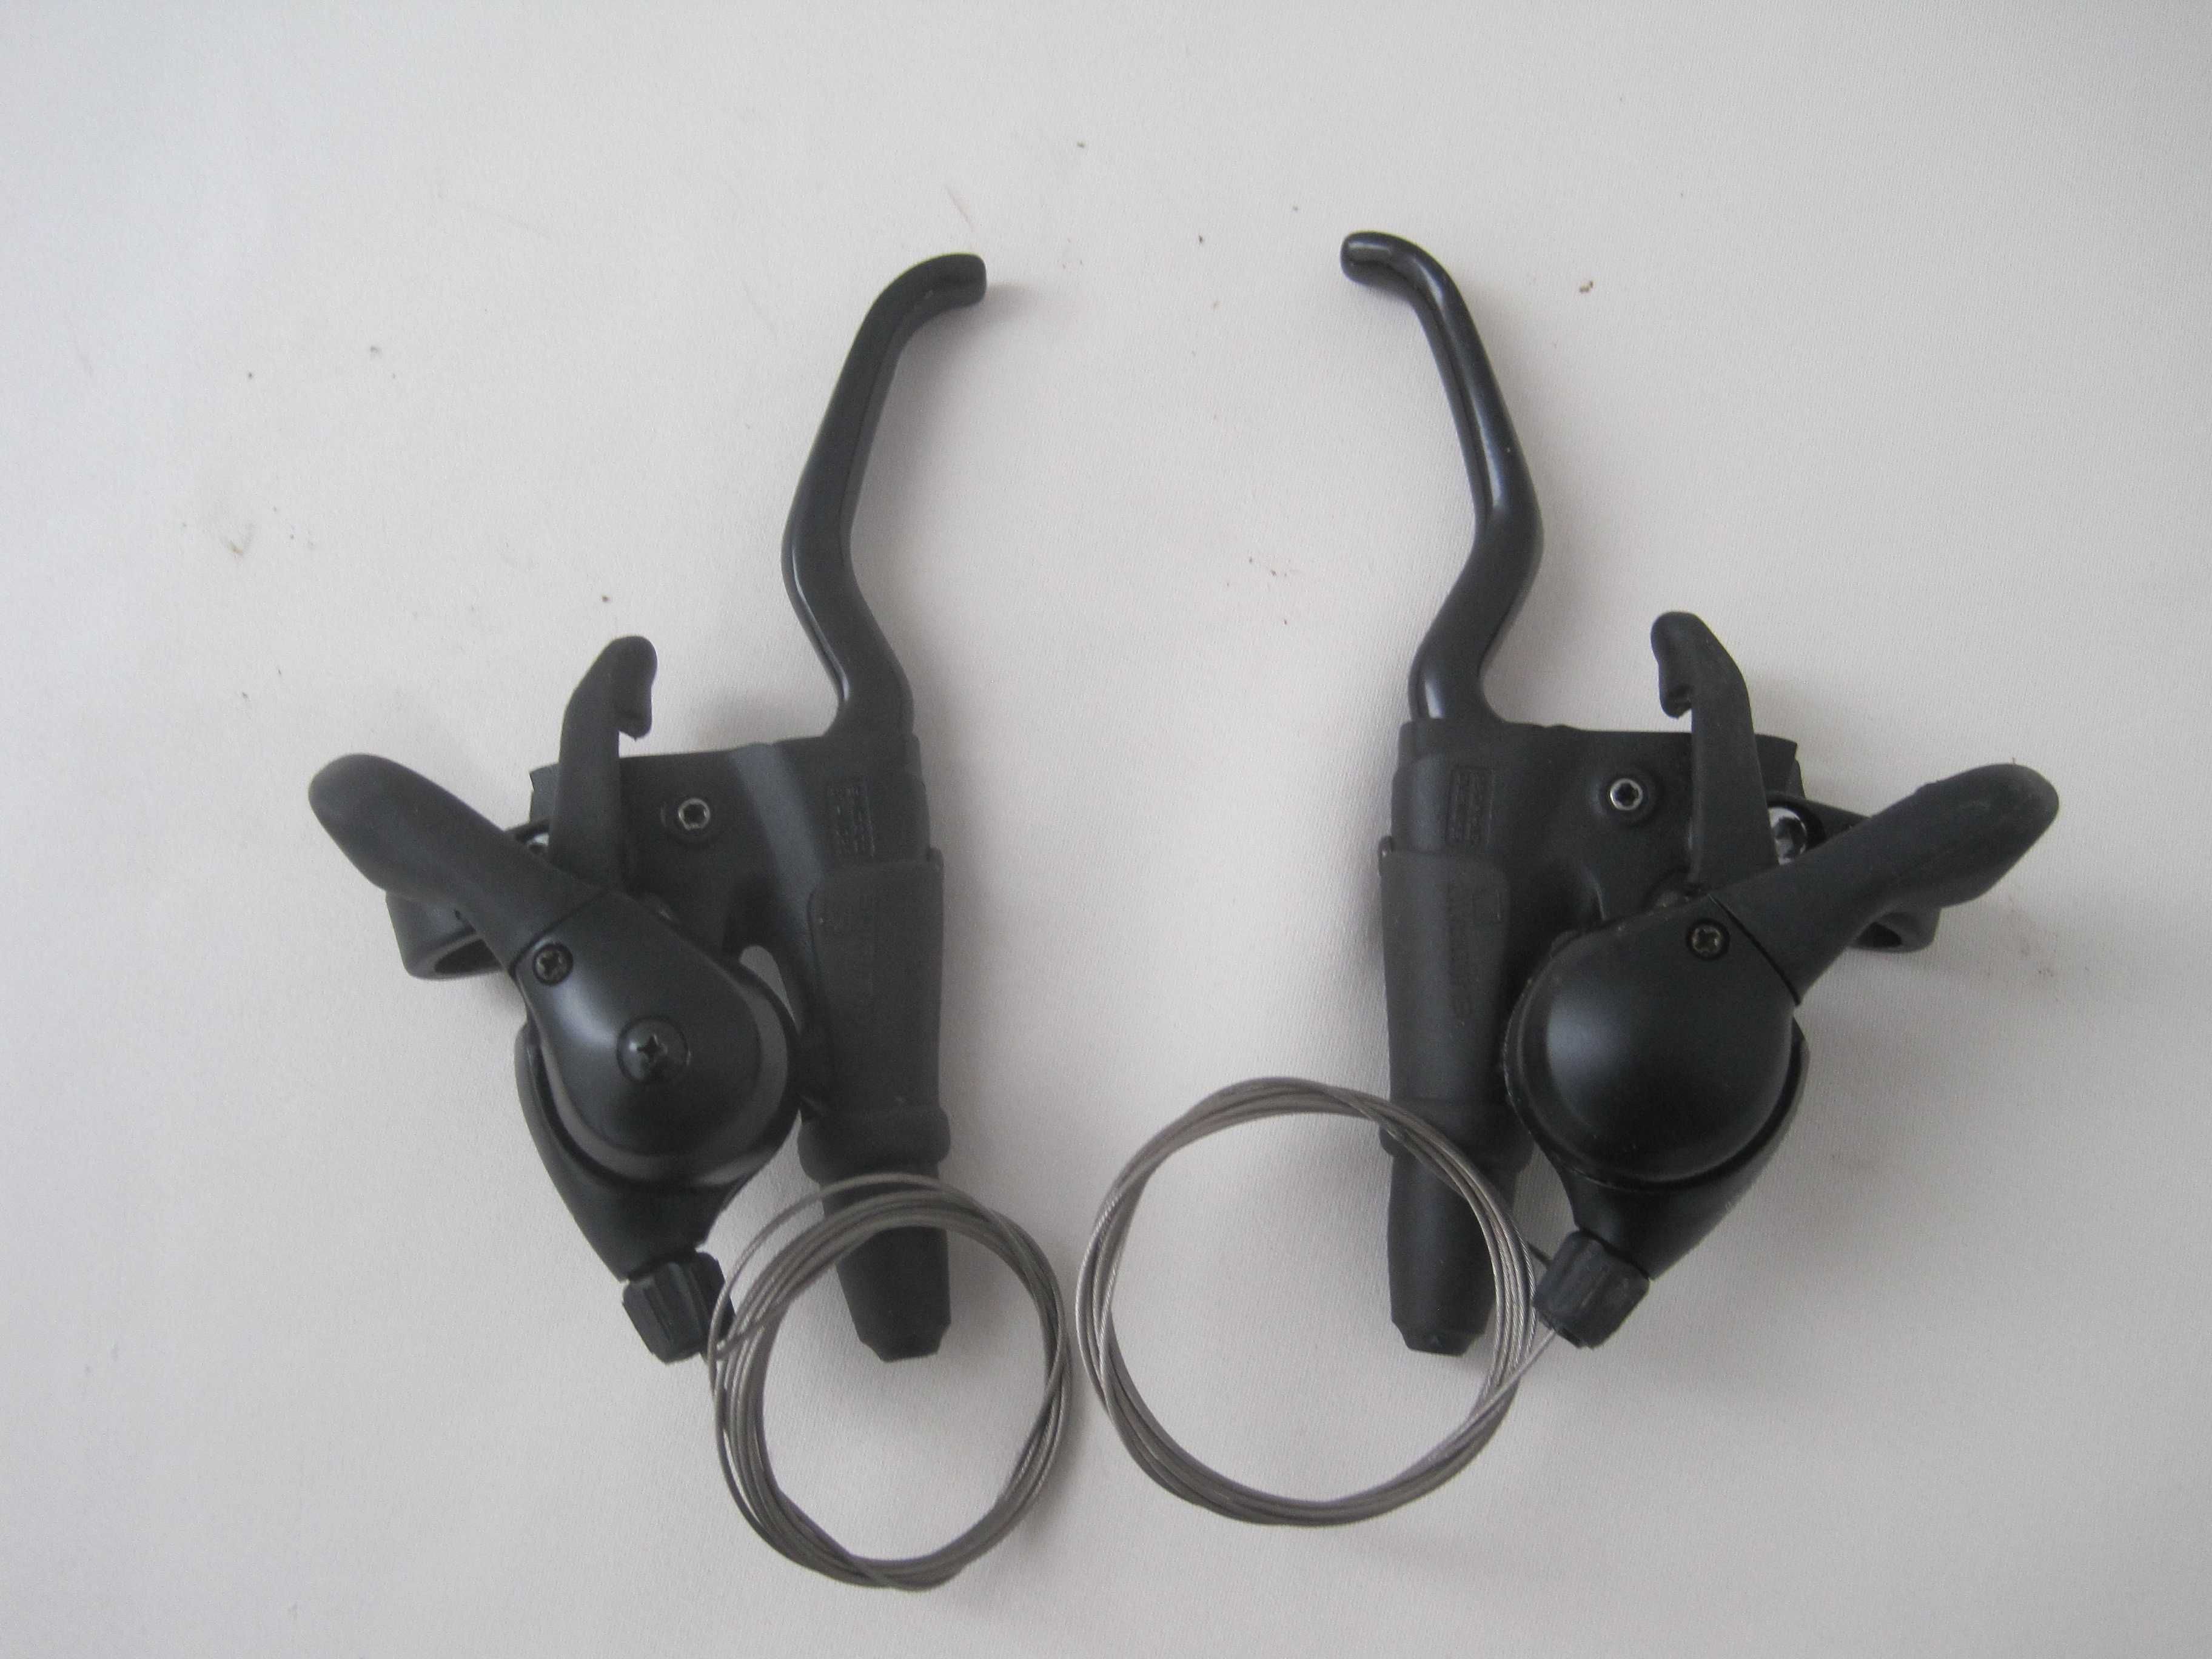 Shimano Deore XT ST-M095-3x7 speed shifters